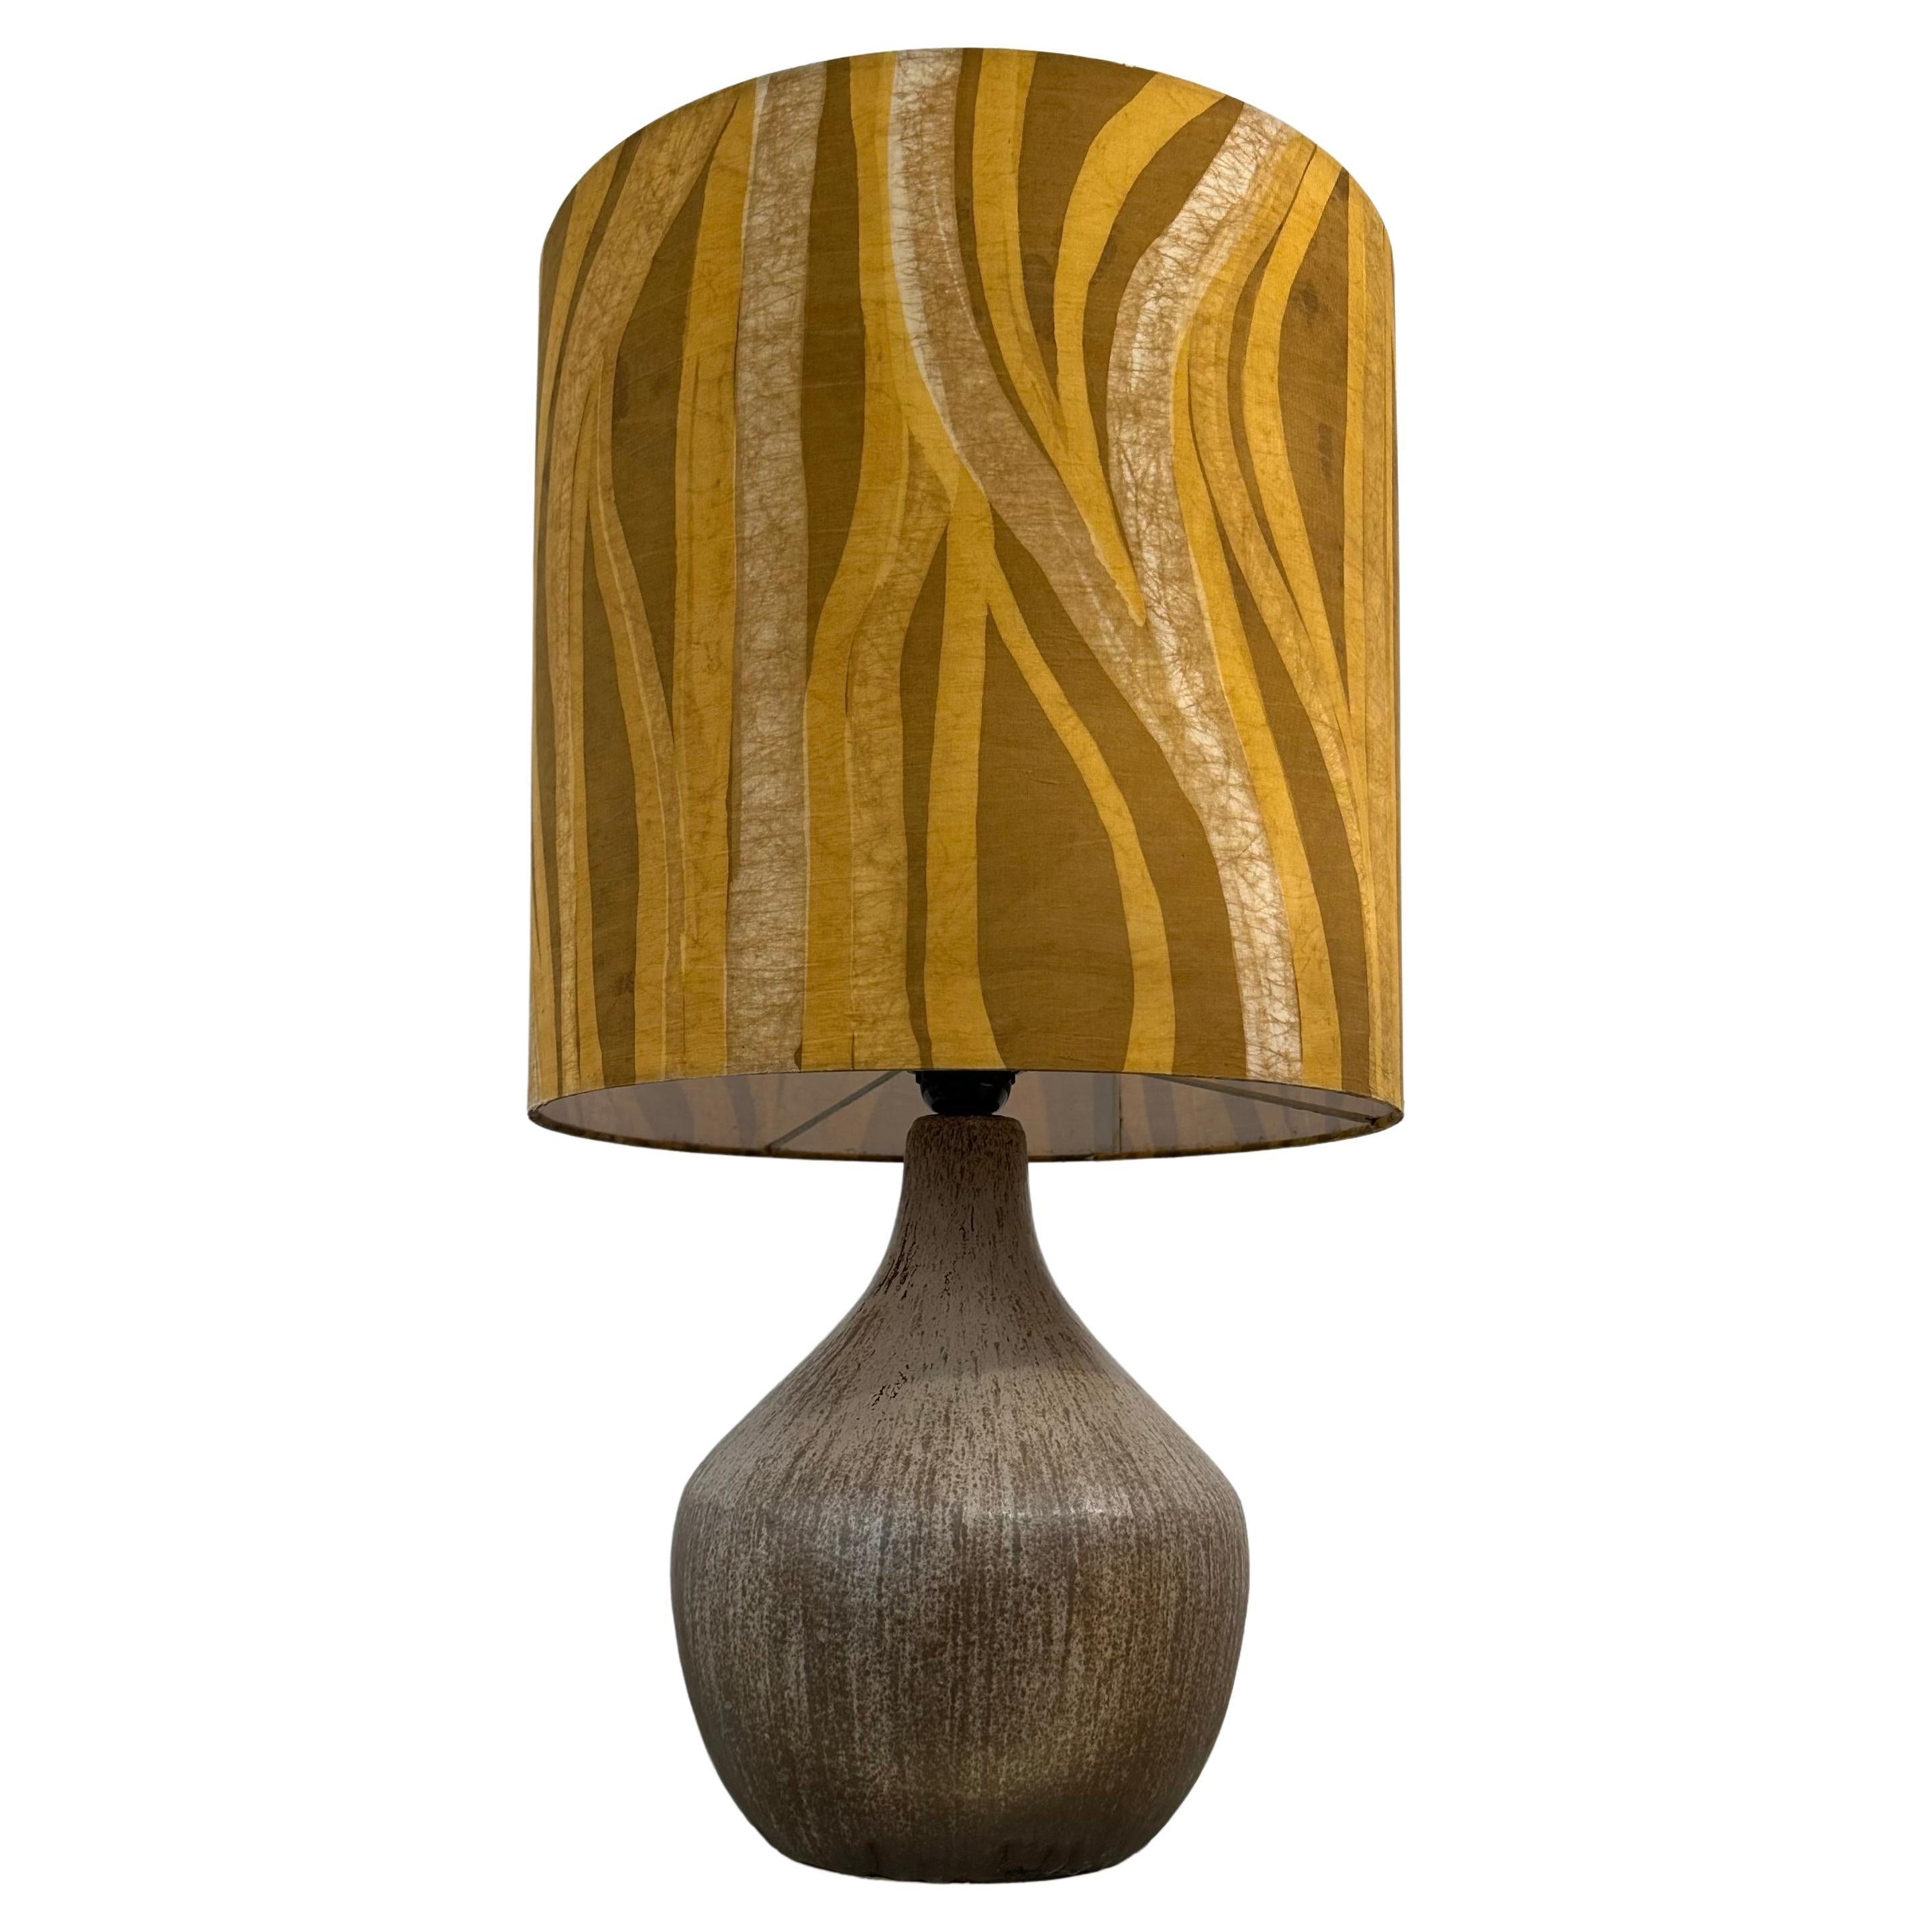 1970s French Earthenware Ceramic Glazed Table Lamp inc Original Geometric Shade For Sale